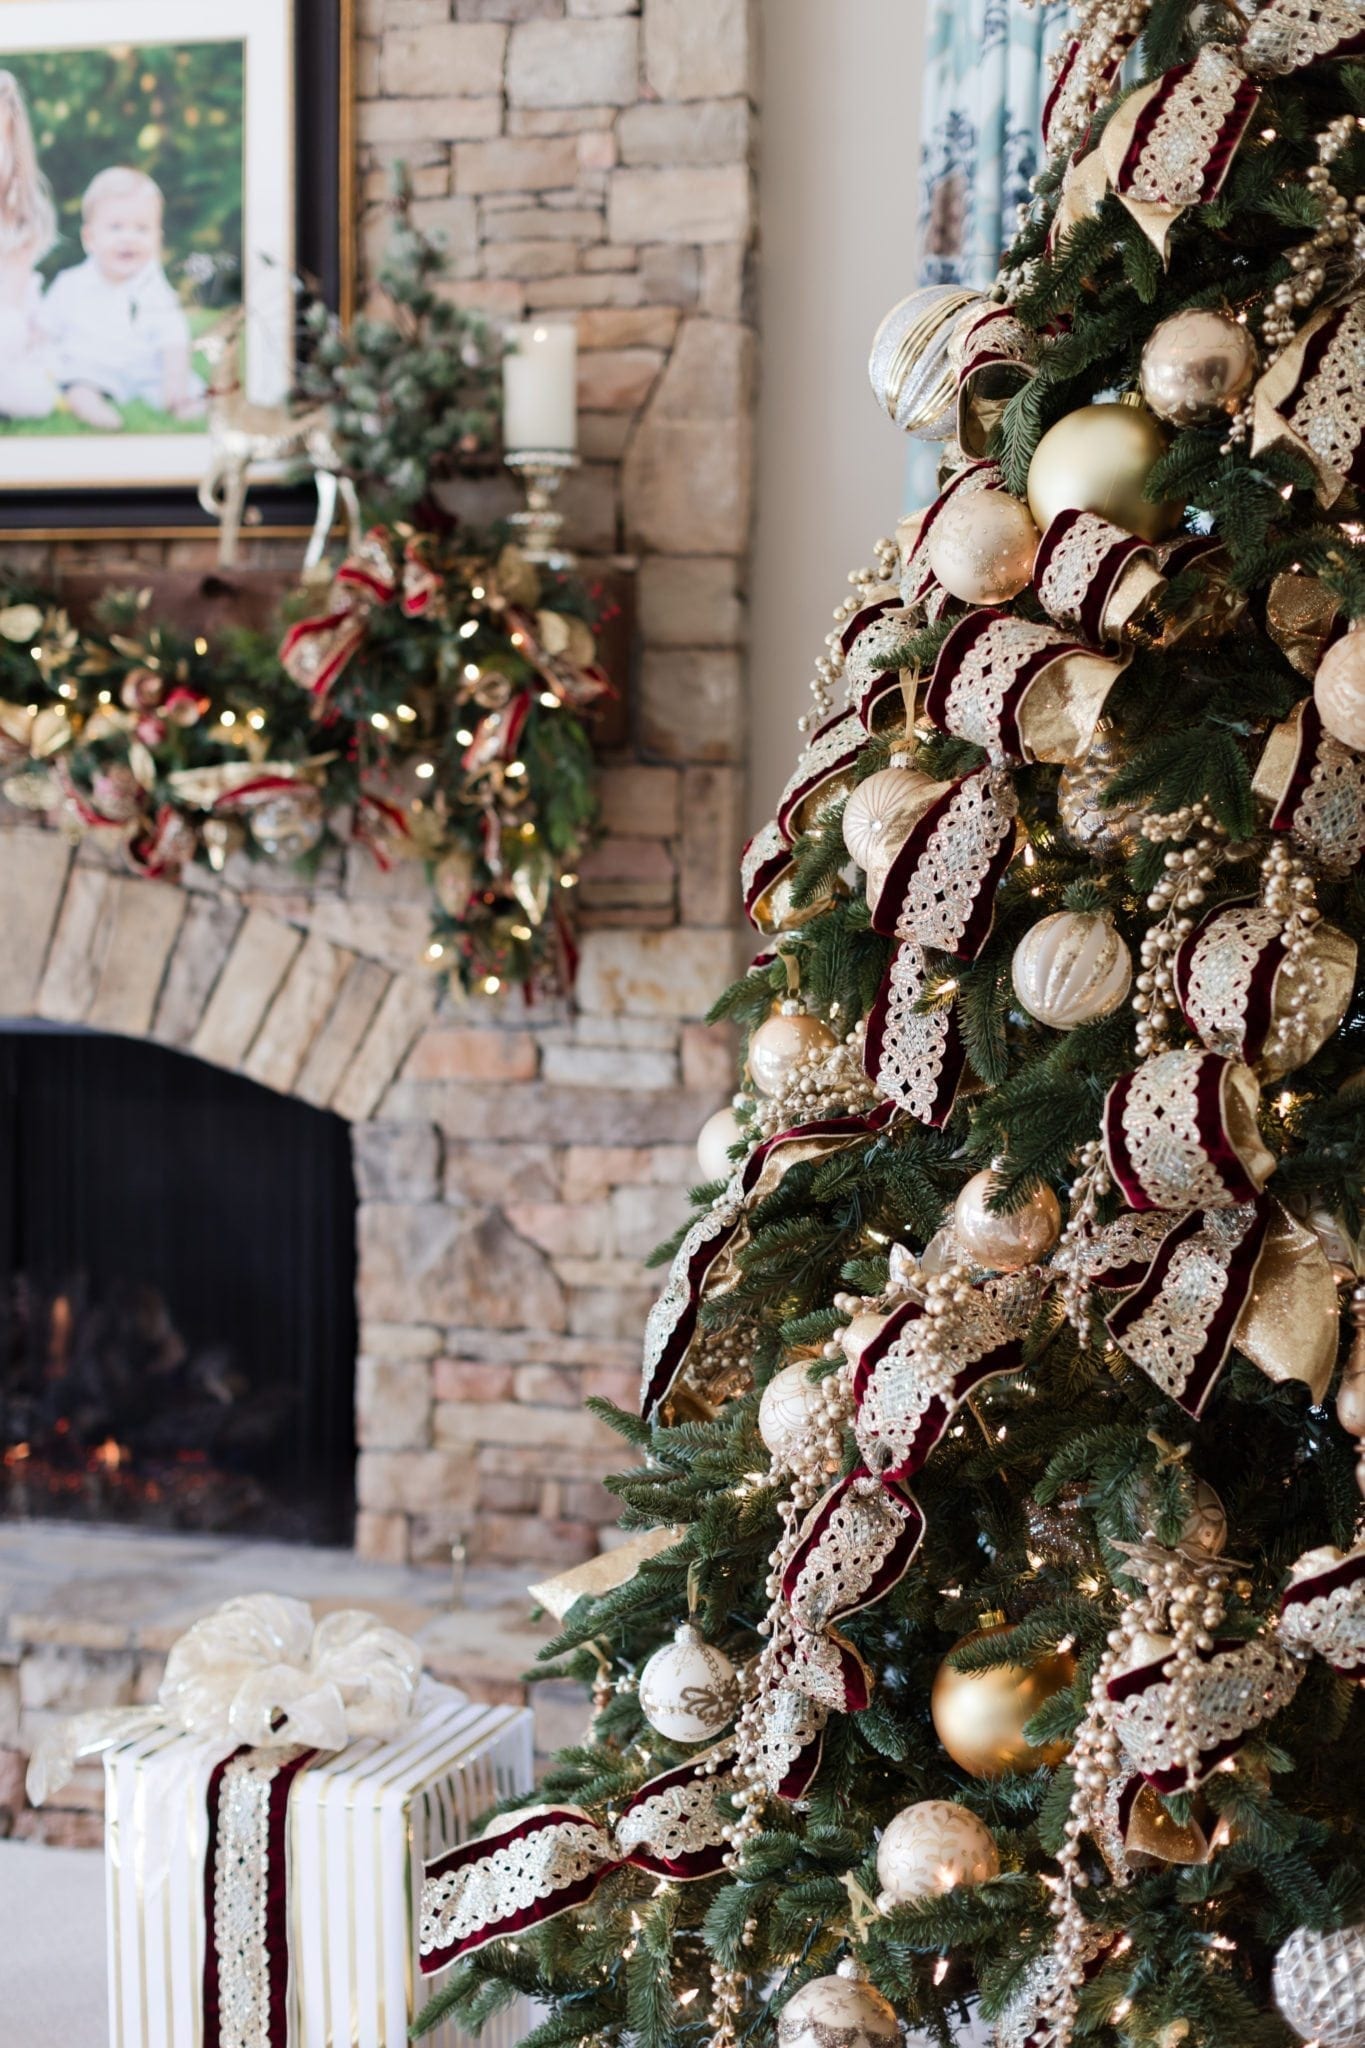 Stone fireplace with Christmas decor on mantle. Frontgate artificial tree with gold and red decorations.